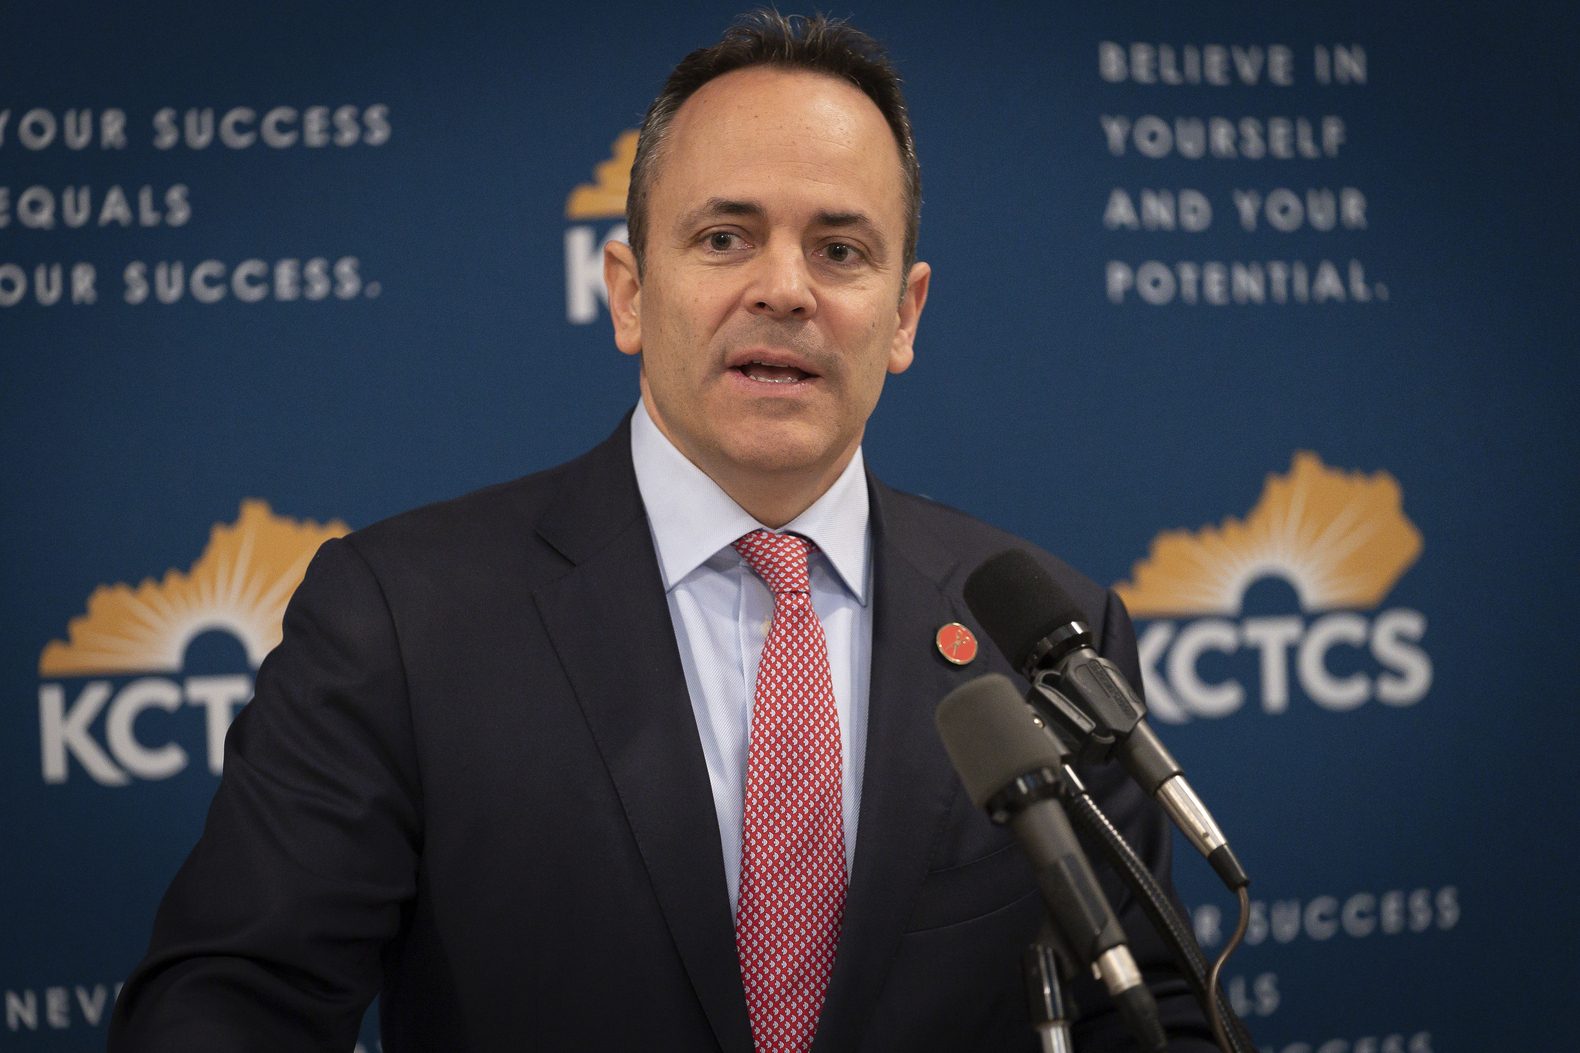 PHOTO: In this Feb 28, 2019, file photo, Kentucky Gov. Matt Bevin speaks in the Capitol building in Frankfort, Ky.